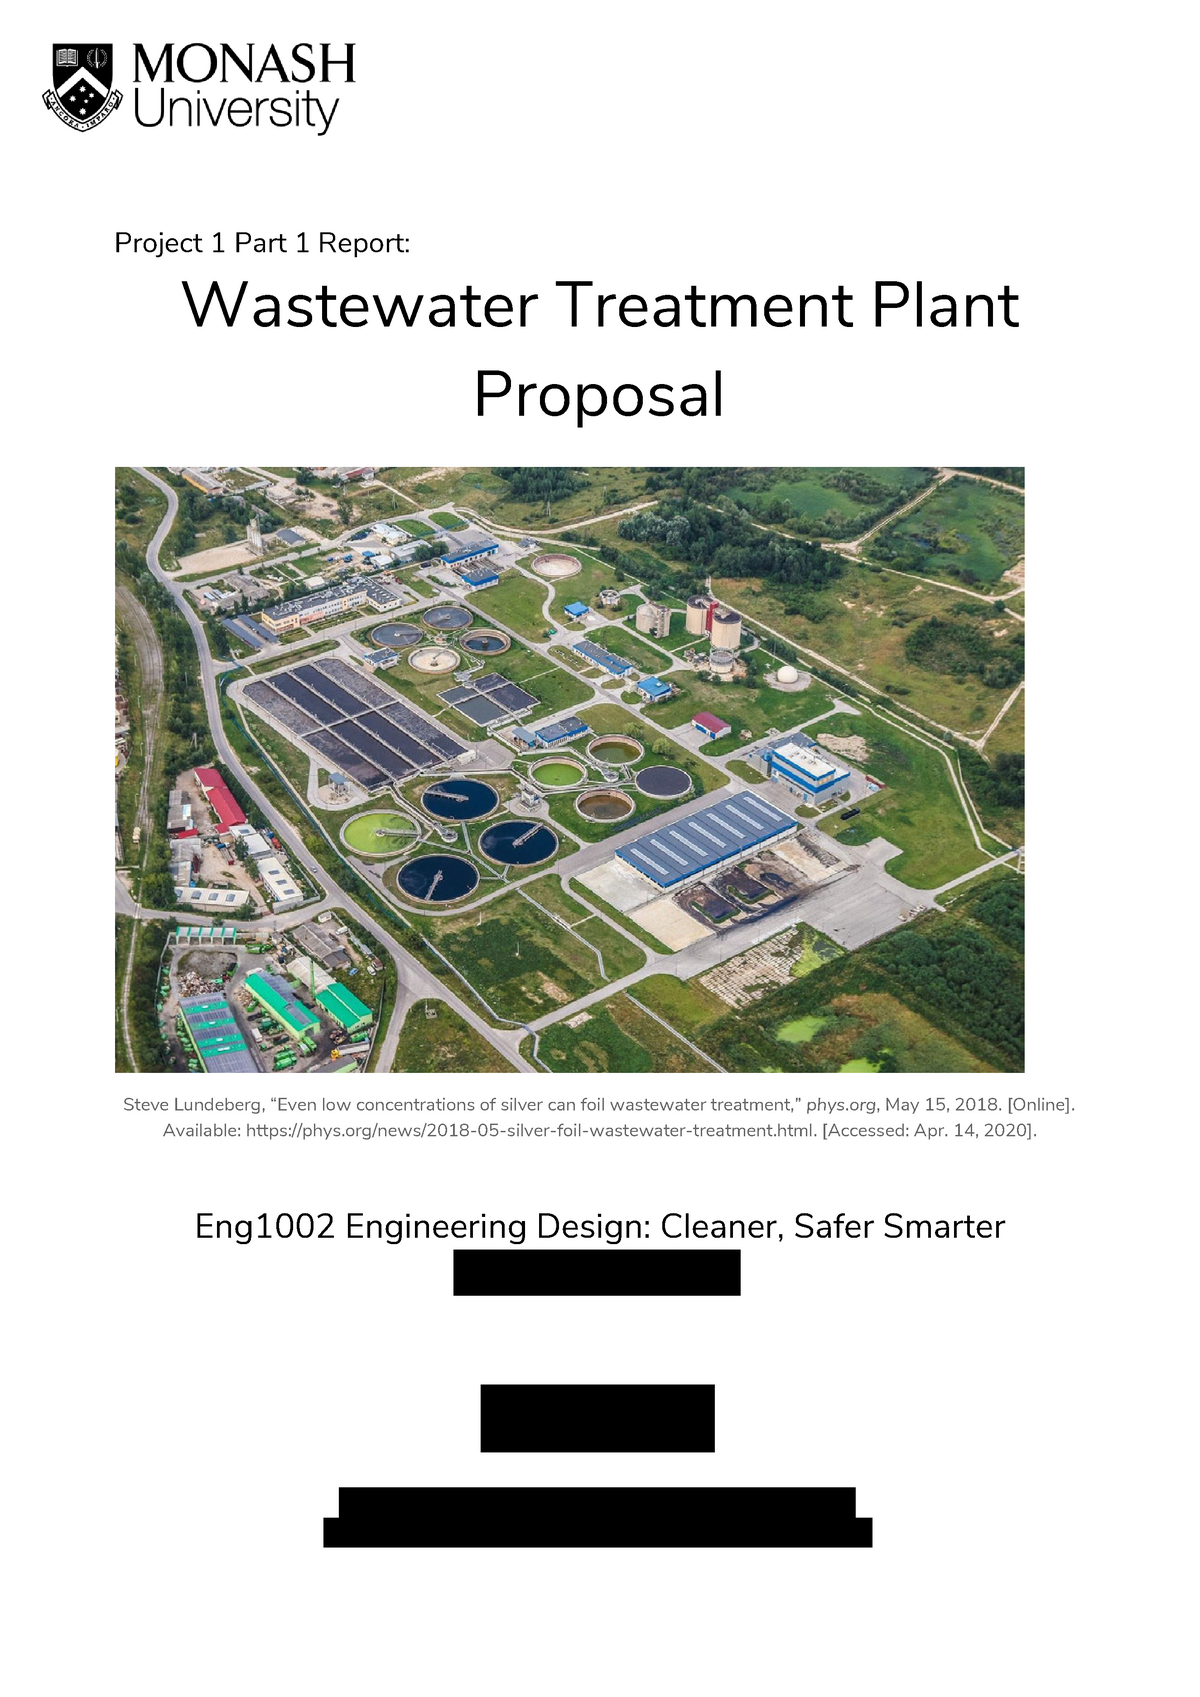 research proposal on waste water treatment